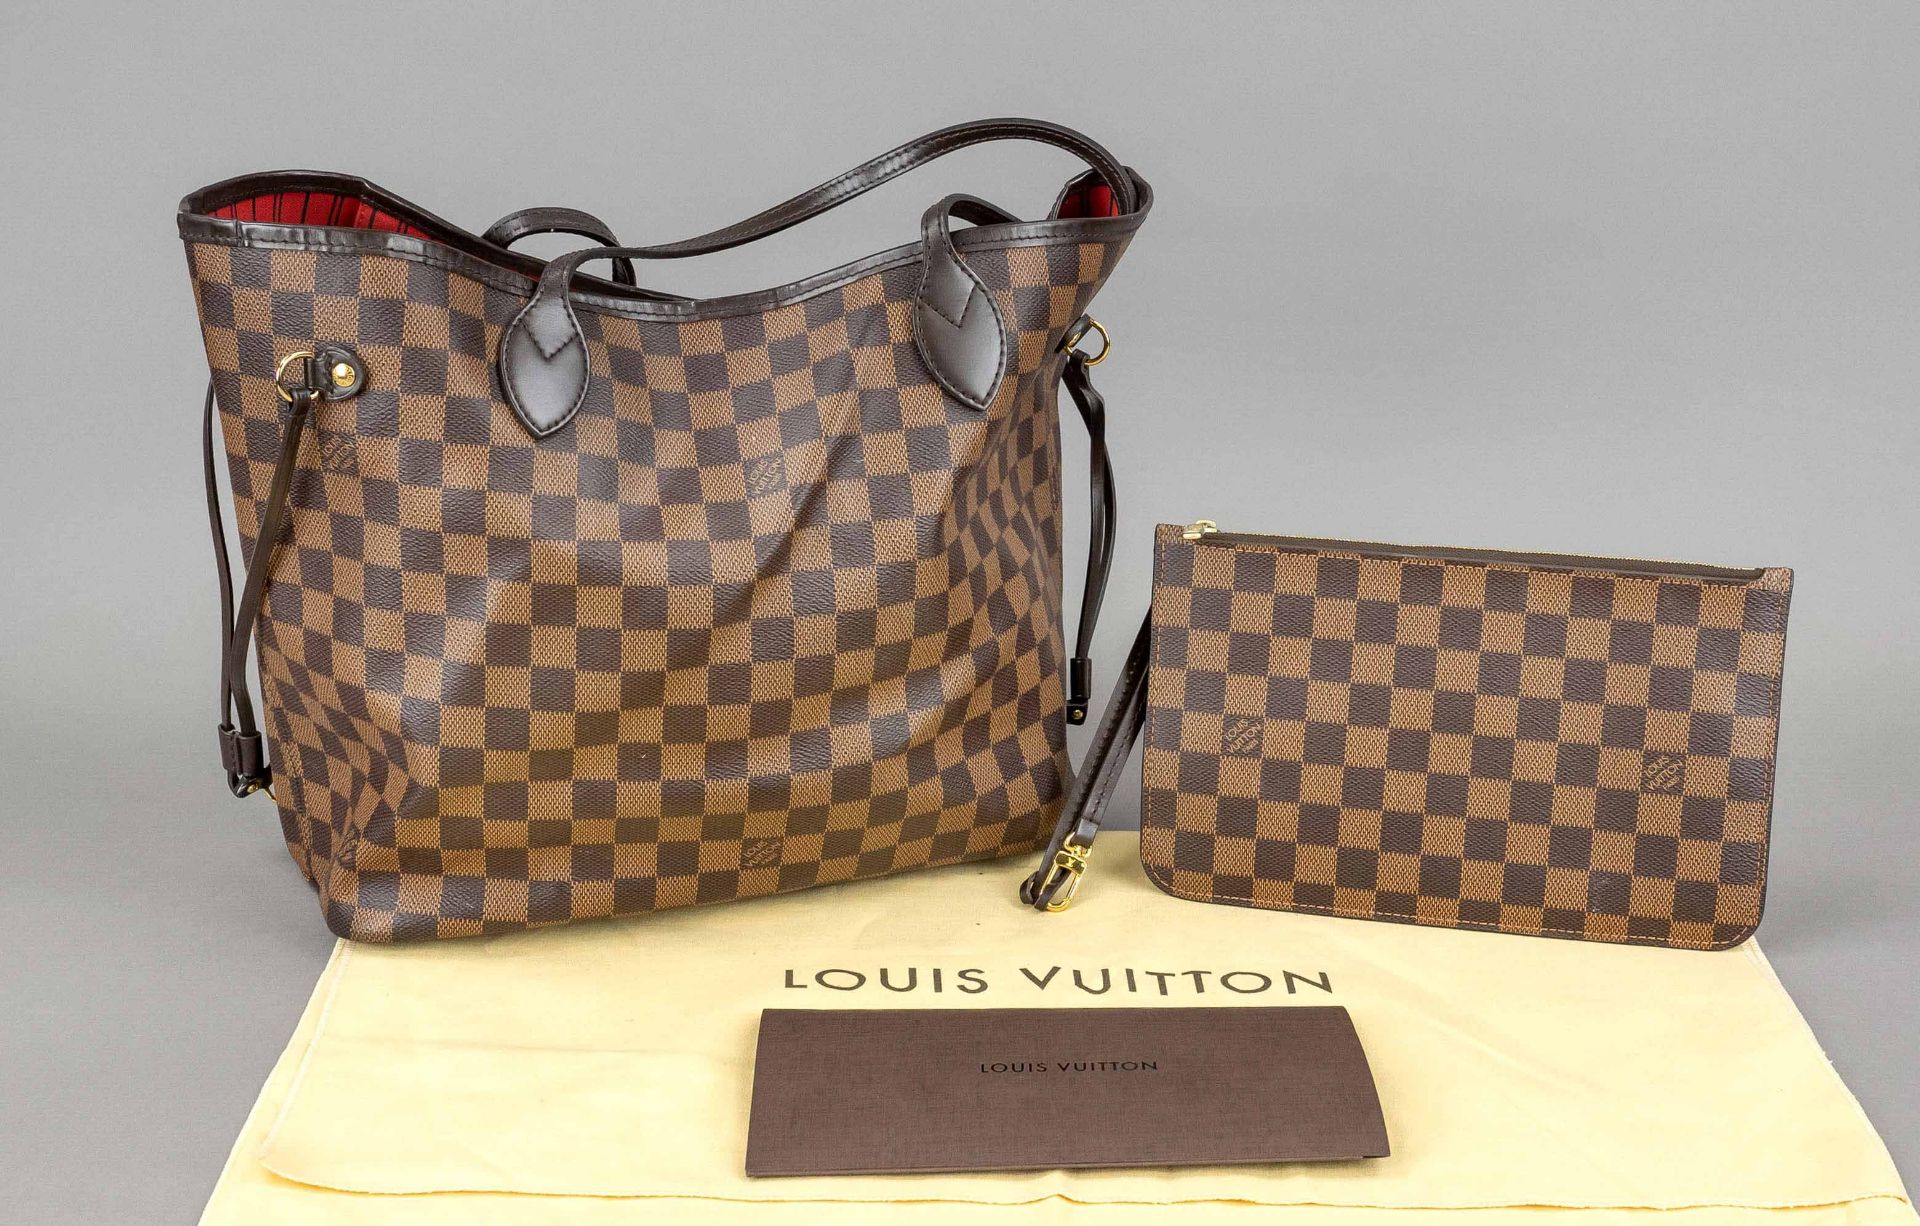 Louis Vuitton, Neverfull Damier Ebene Canvas MM Bag, brown-checked rubberized cotton fabric with